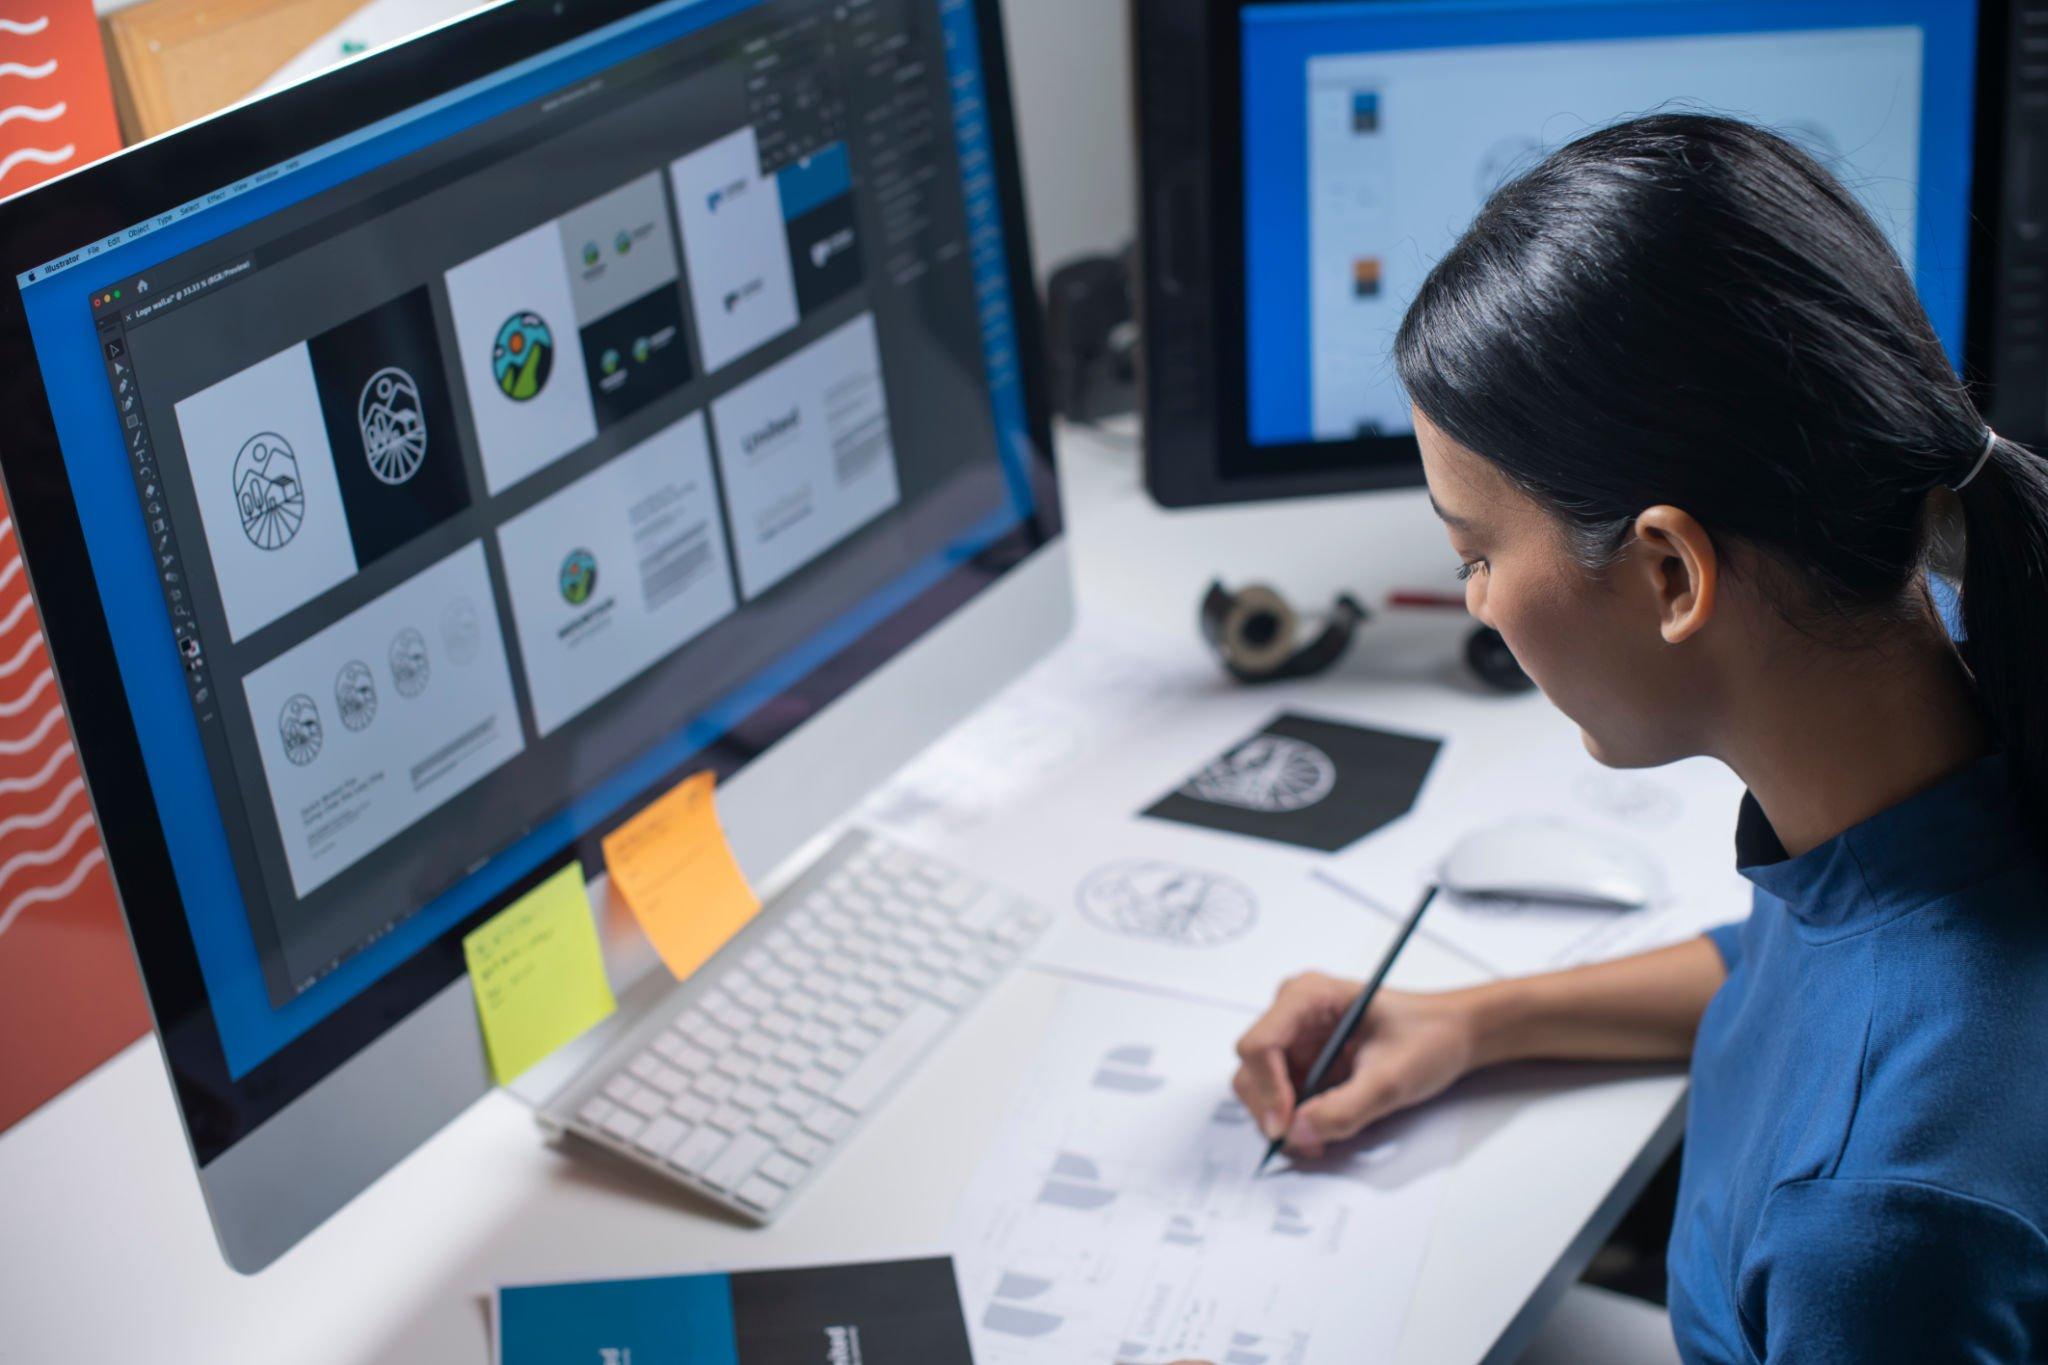 Woman developing branding guidelines and logo design on her computer and on paper.